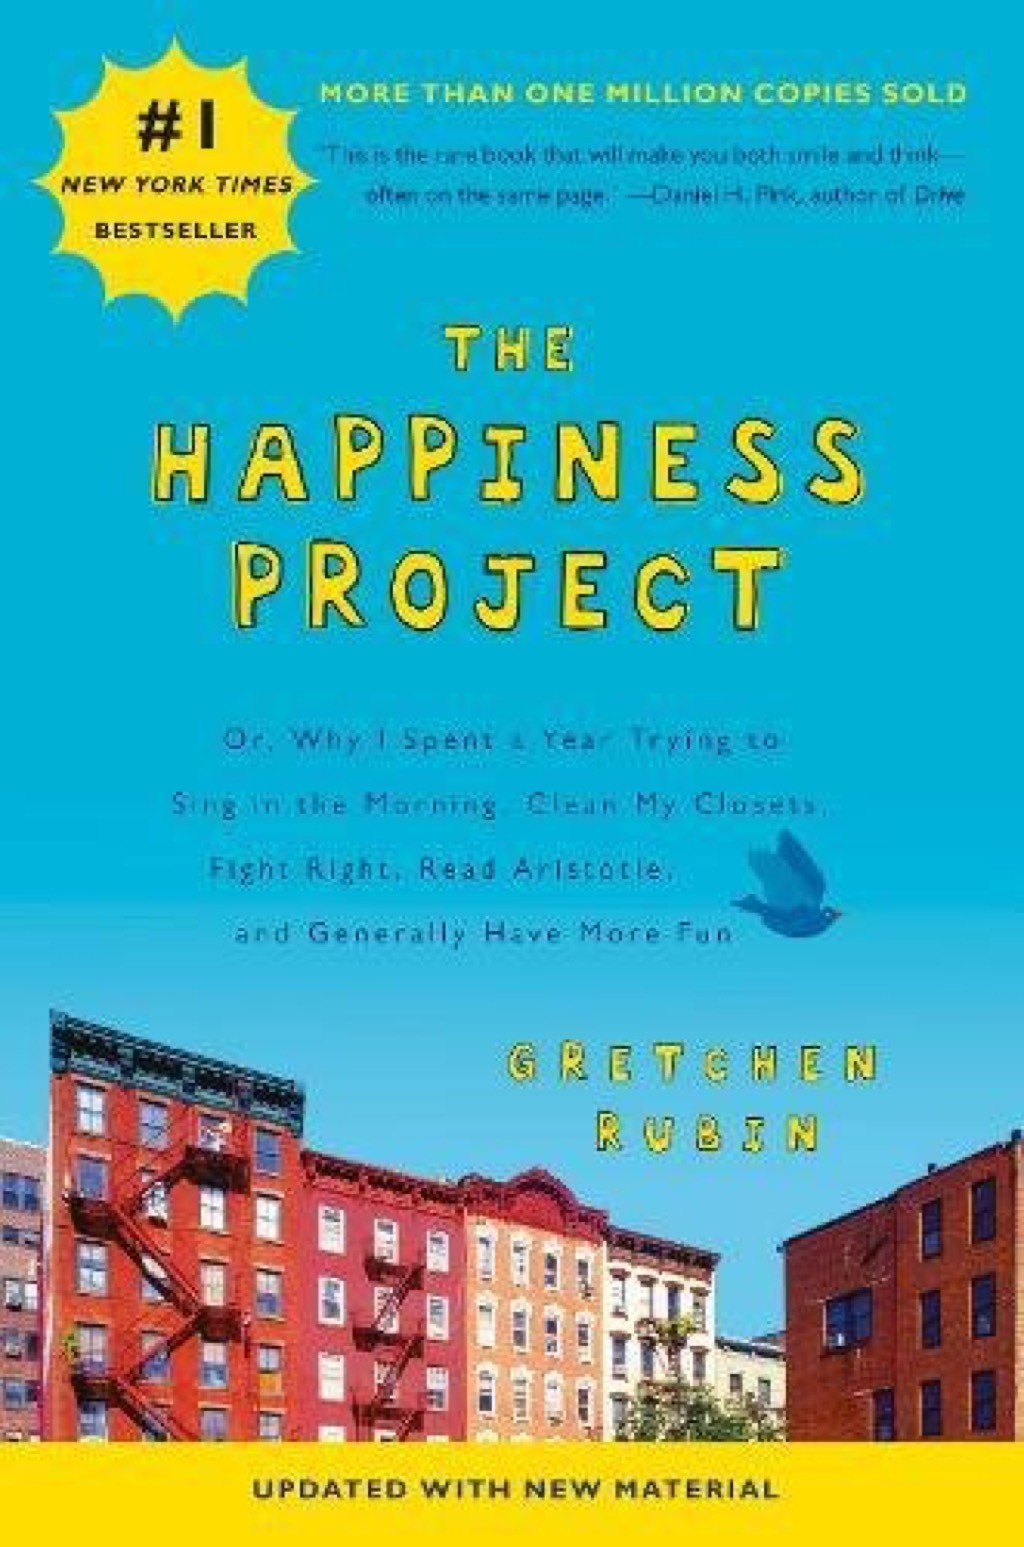 The Happiness Project by Gretchen Rubin books every woman should read in her 40s